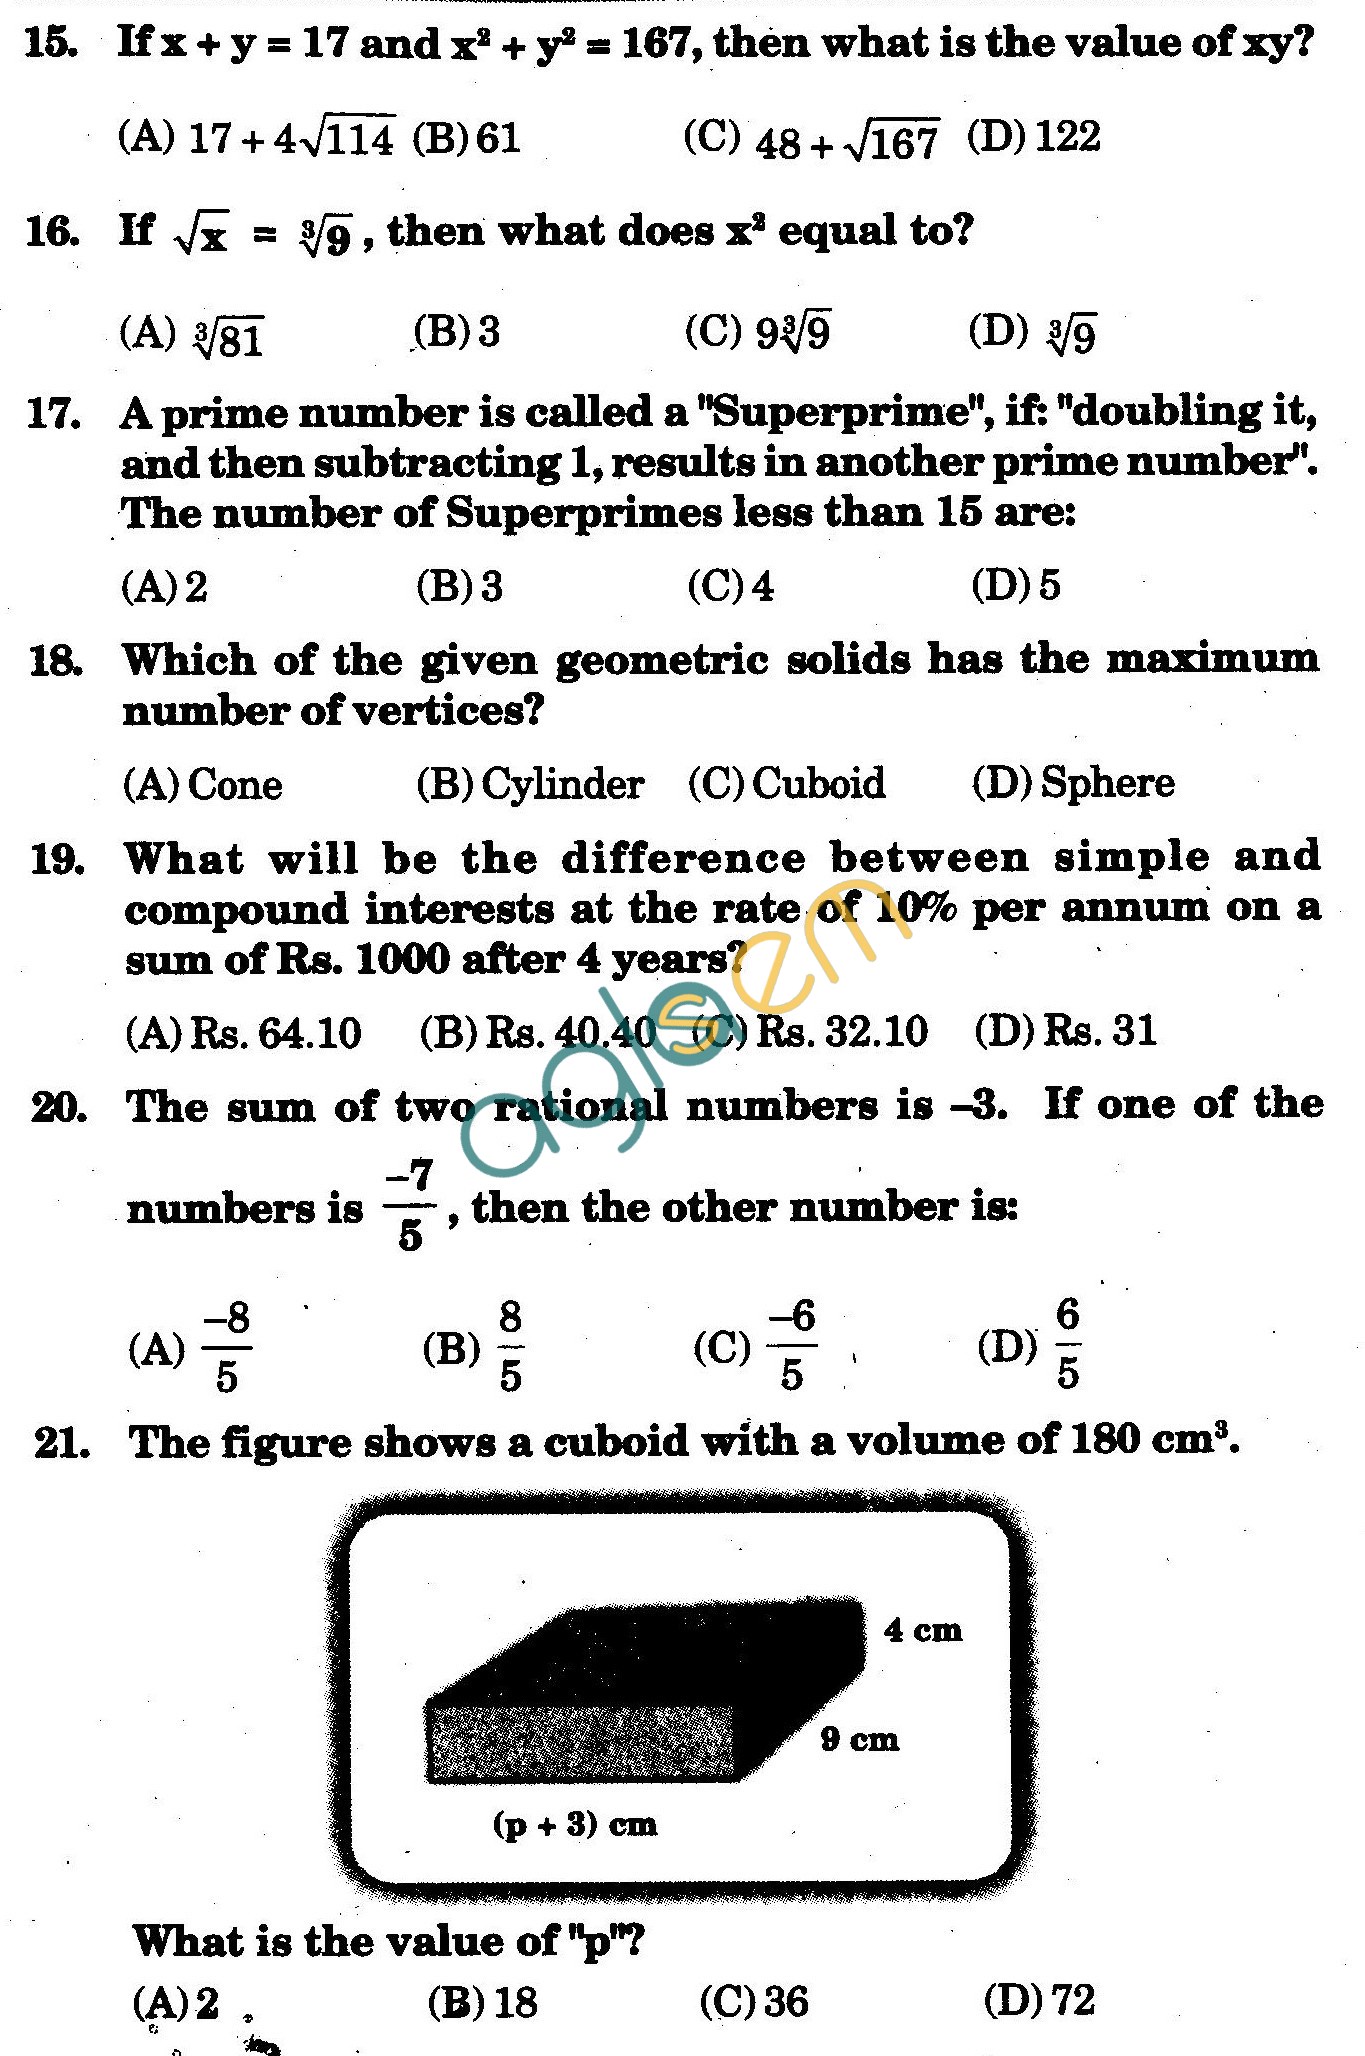 NSTSE 2009 Class VIII Question Paper with Answers - Mathematics